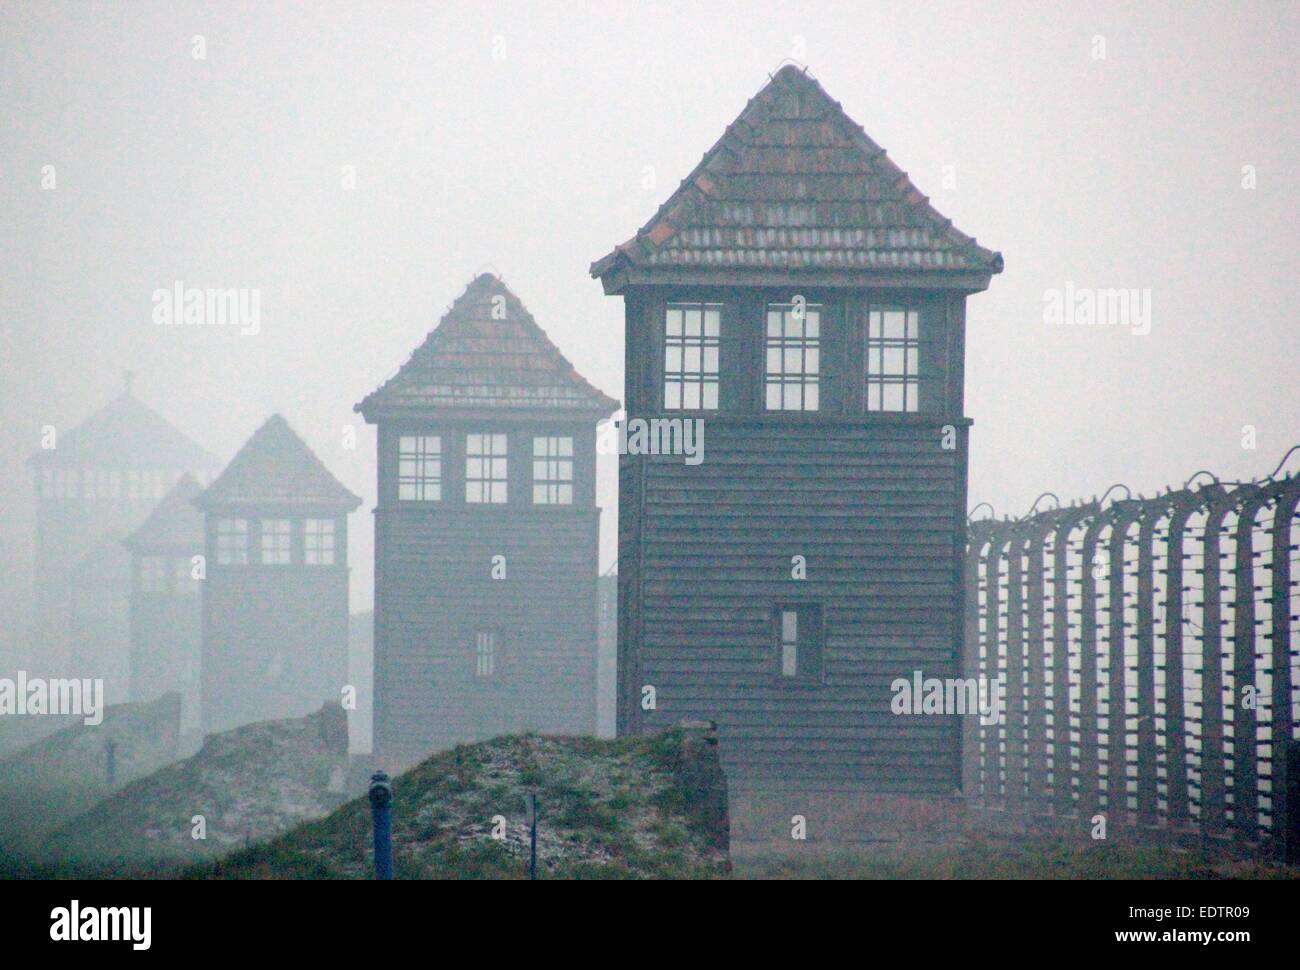 The barbed wired fence and watch towers of Auschwitz-Birkenau concentration camp stand covered in mist in Oswiecim, Poland, 5 October 2014. Auschwitz-Birkenau, also know as Auschwitz II was errected around three kilometres from the main camp and was originally conceived by Heinrich Himmler to accommodate 100,000 Soviet P.o.Ws. The slopes next to the towers wer bunker units were SS guards could take cover during air raids. The camp was liberated by Soviet troops on 27 January 1945 and was turned into a memorial site and museum in 1947. The camp has been since 2007 a listed UNESCO heritage site Stock Photo